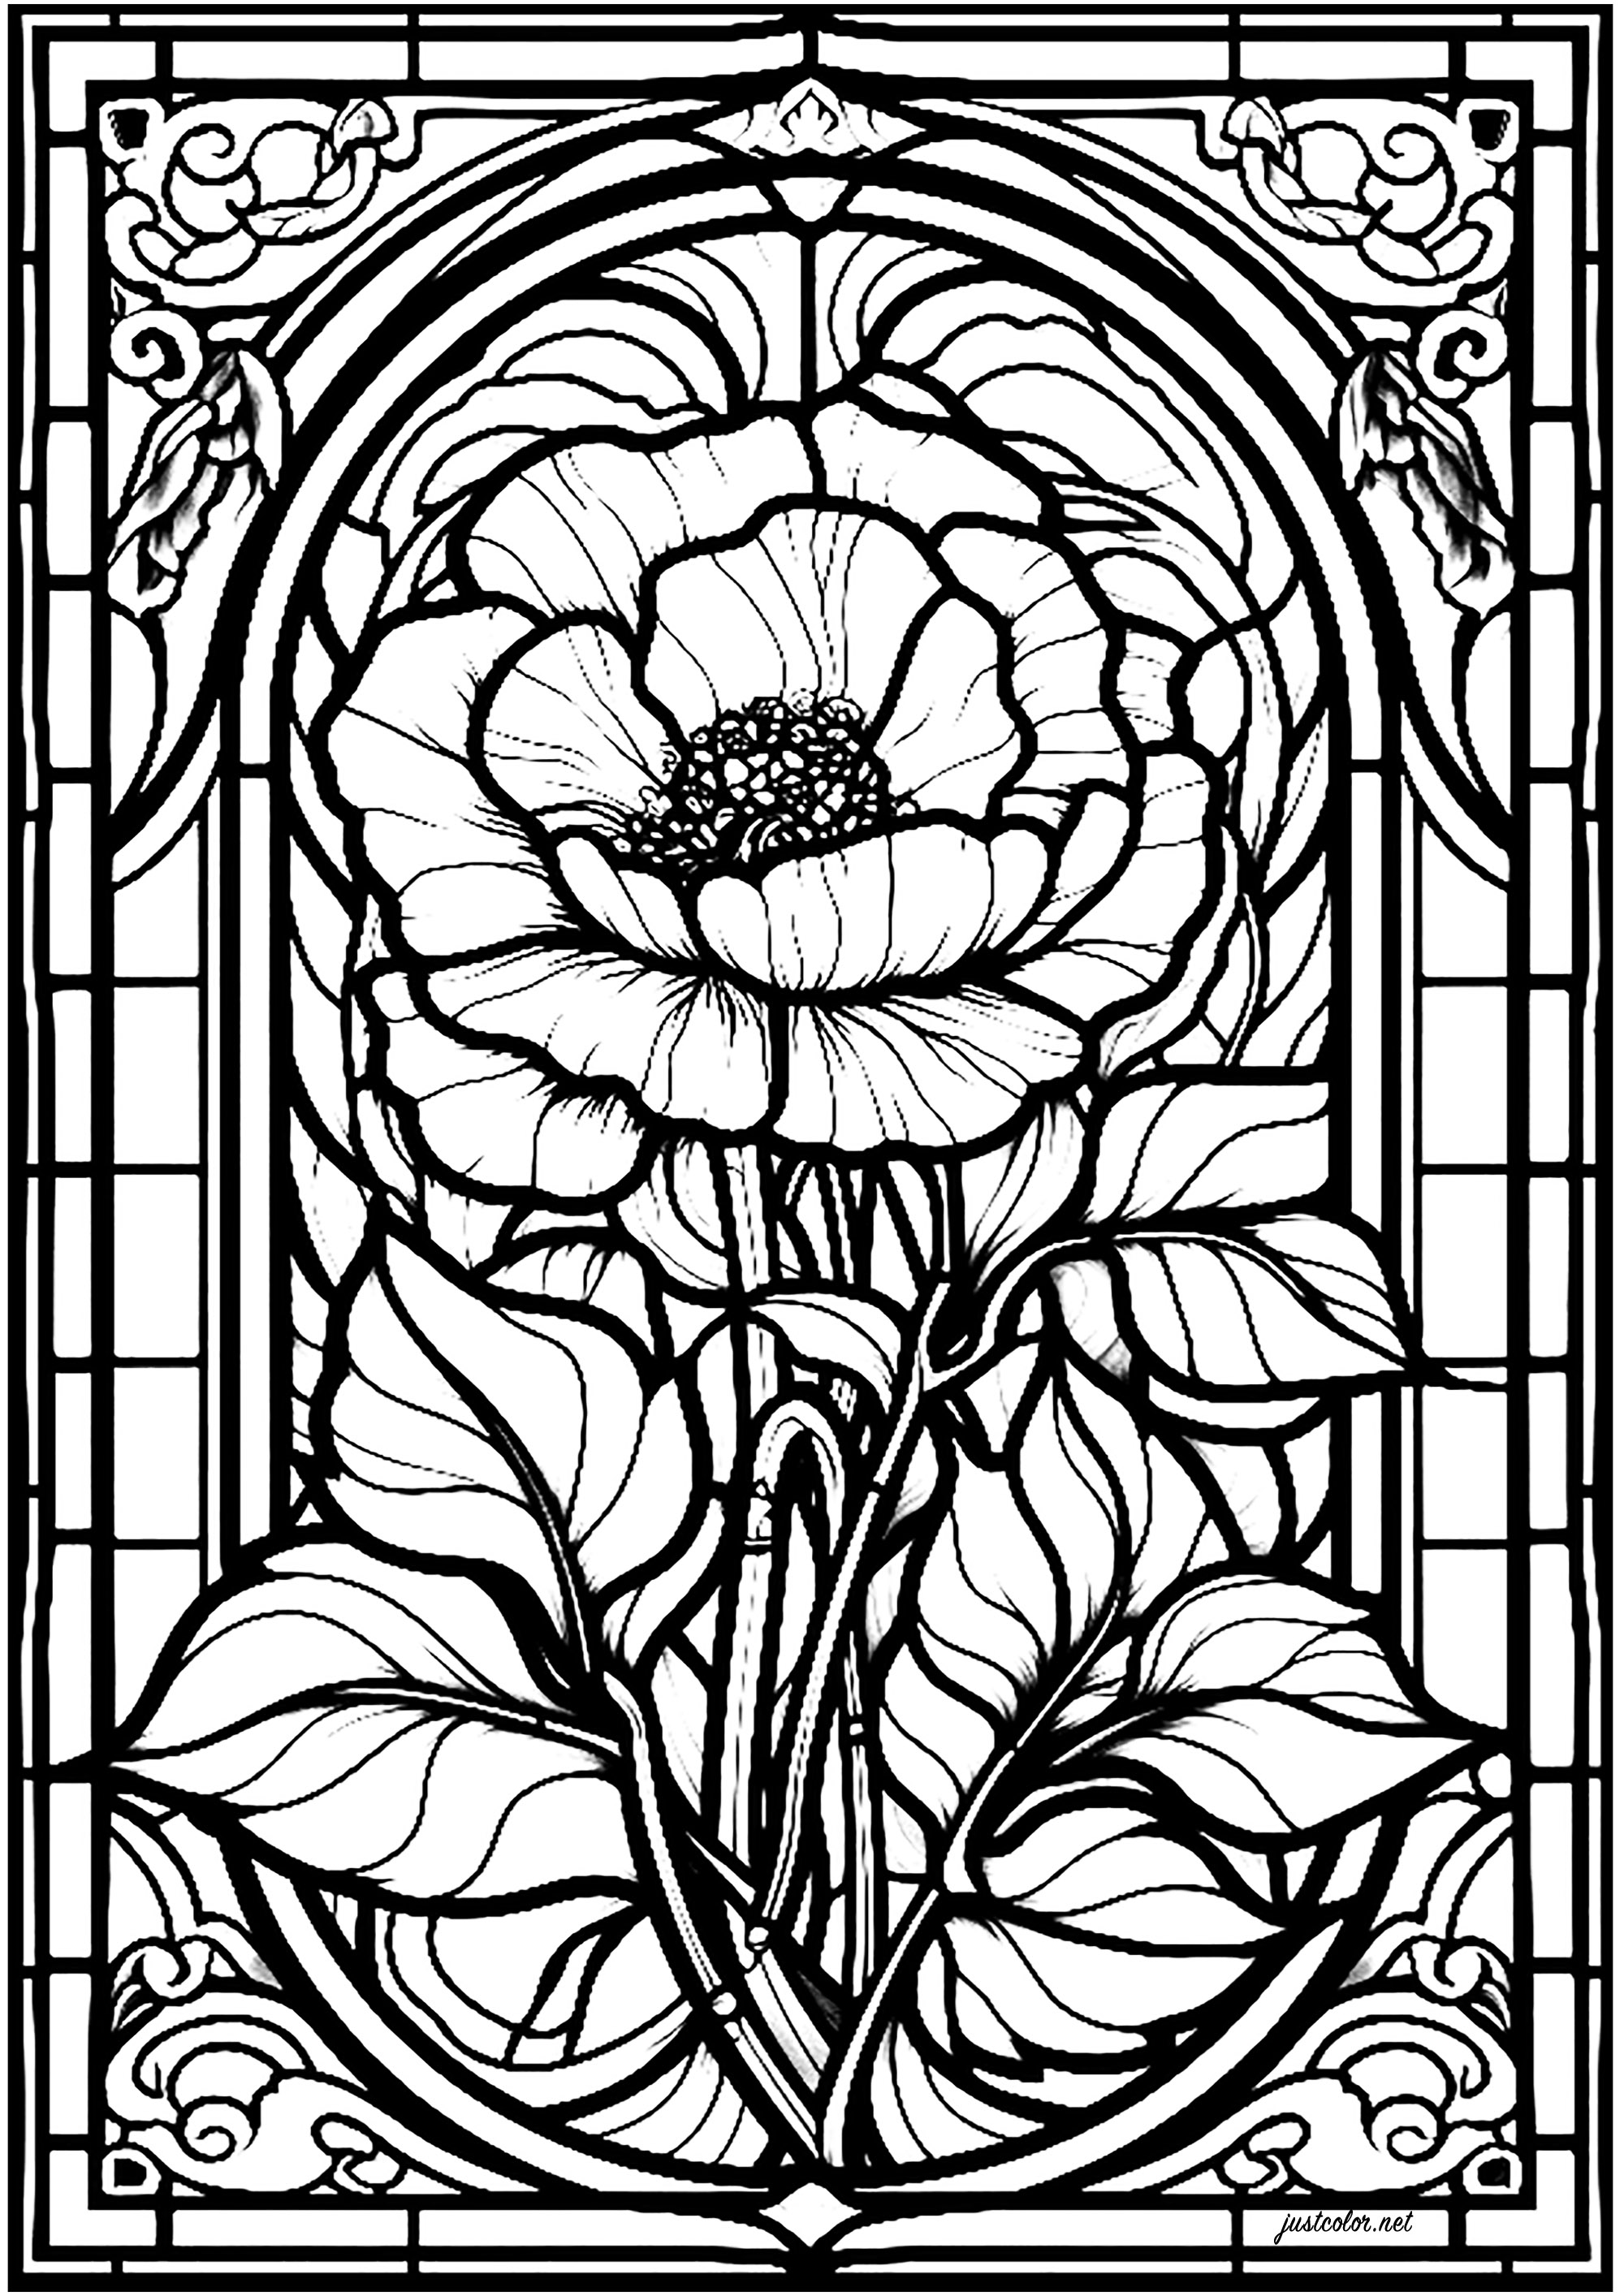 A beautiful flower in a stained glass window